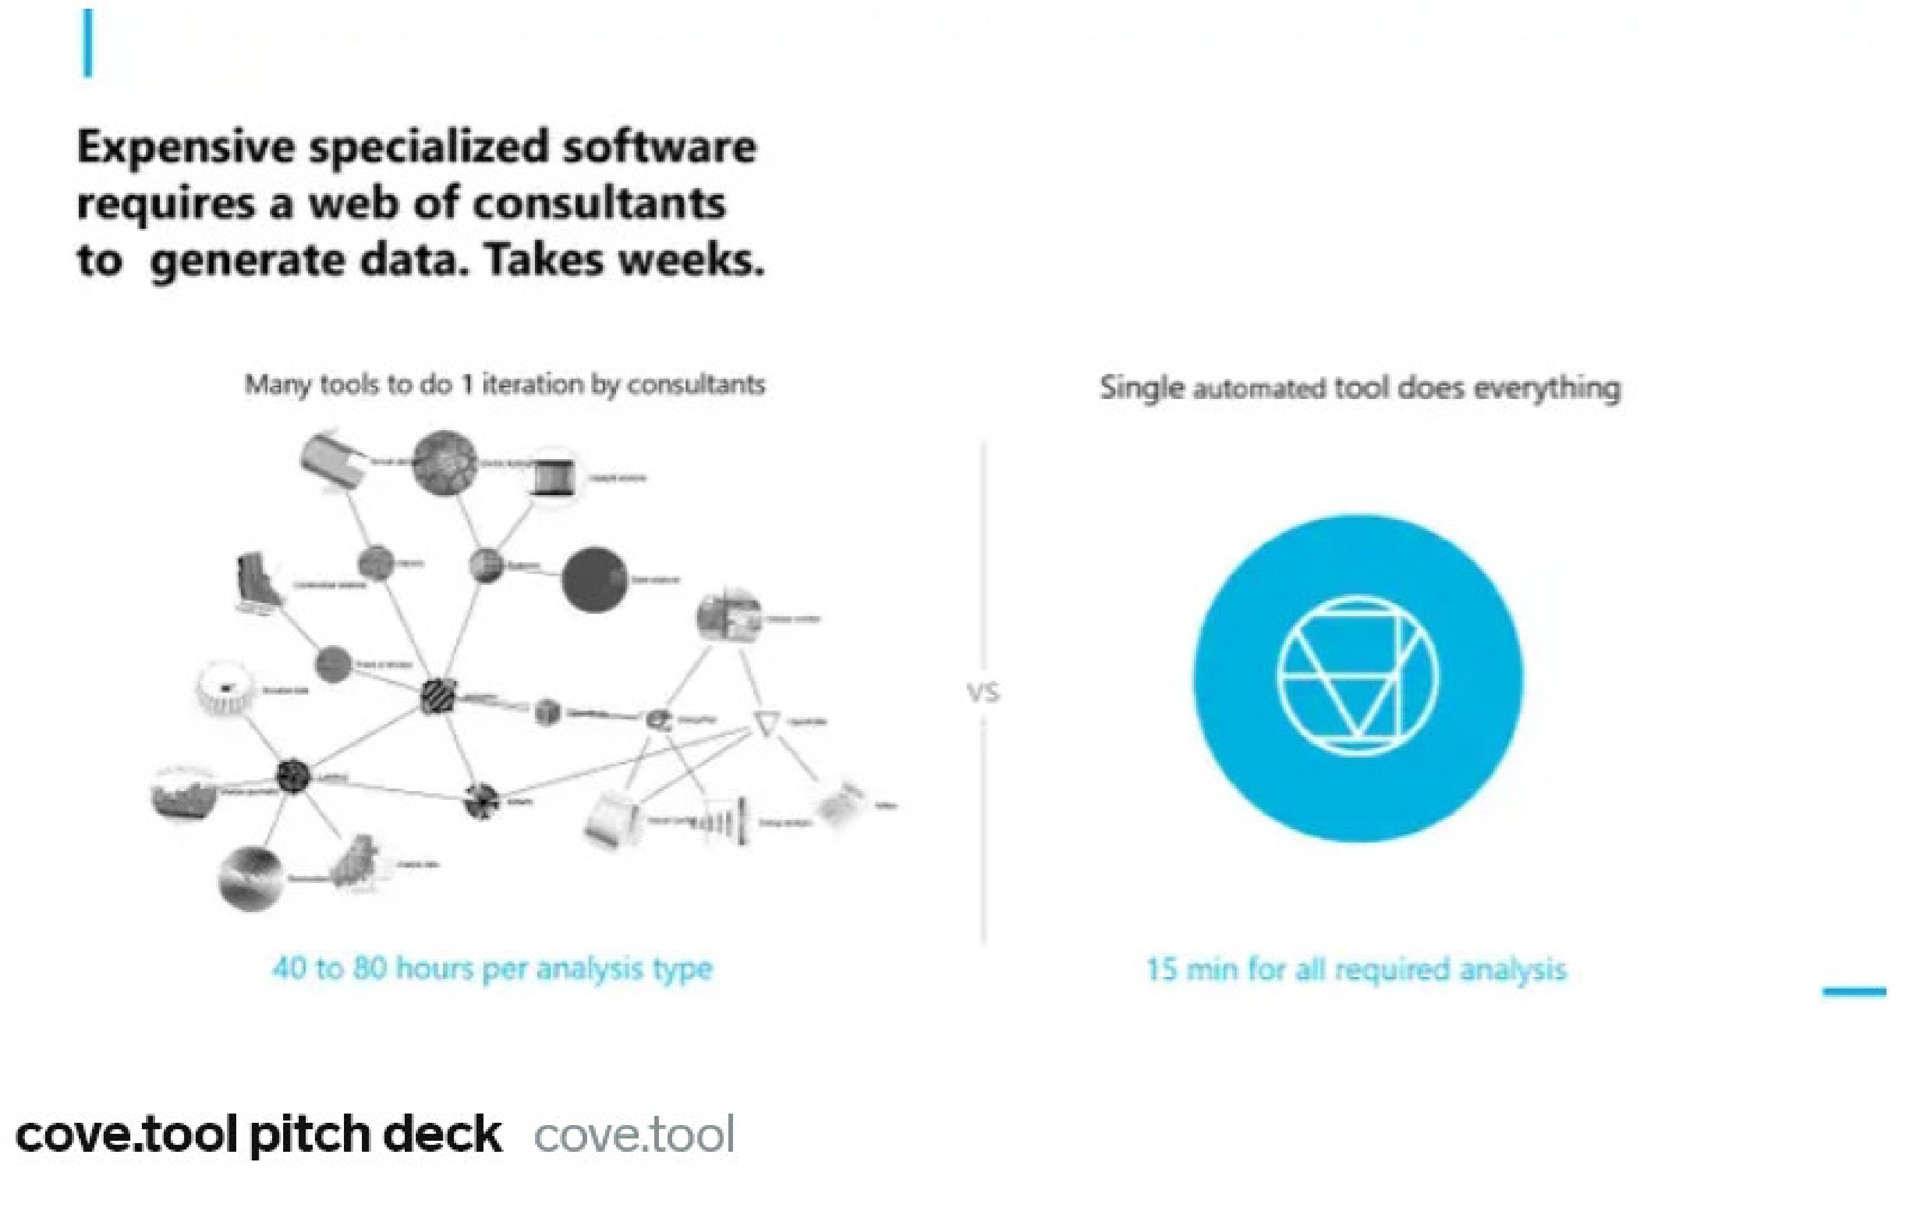 expensive specialized requires a web of consultants to generate data takes weeks a a a cove tool pitch deck cove too | Covetool